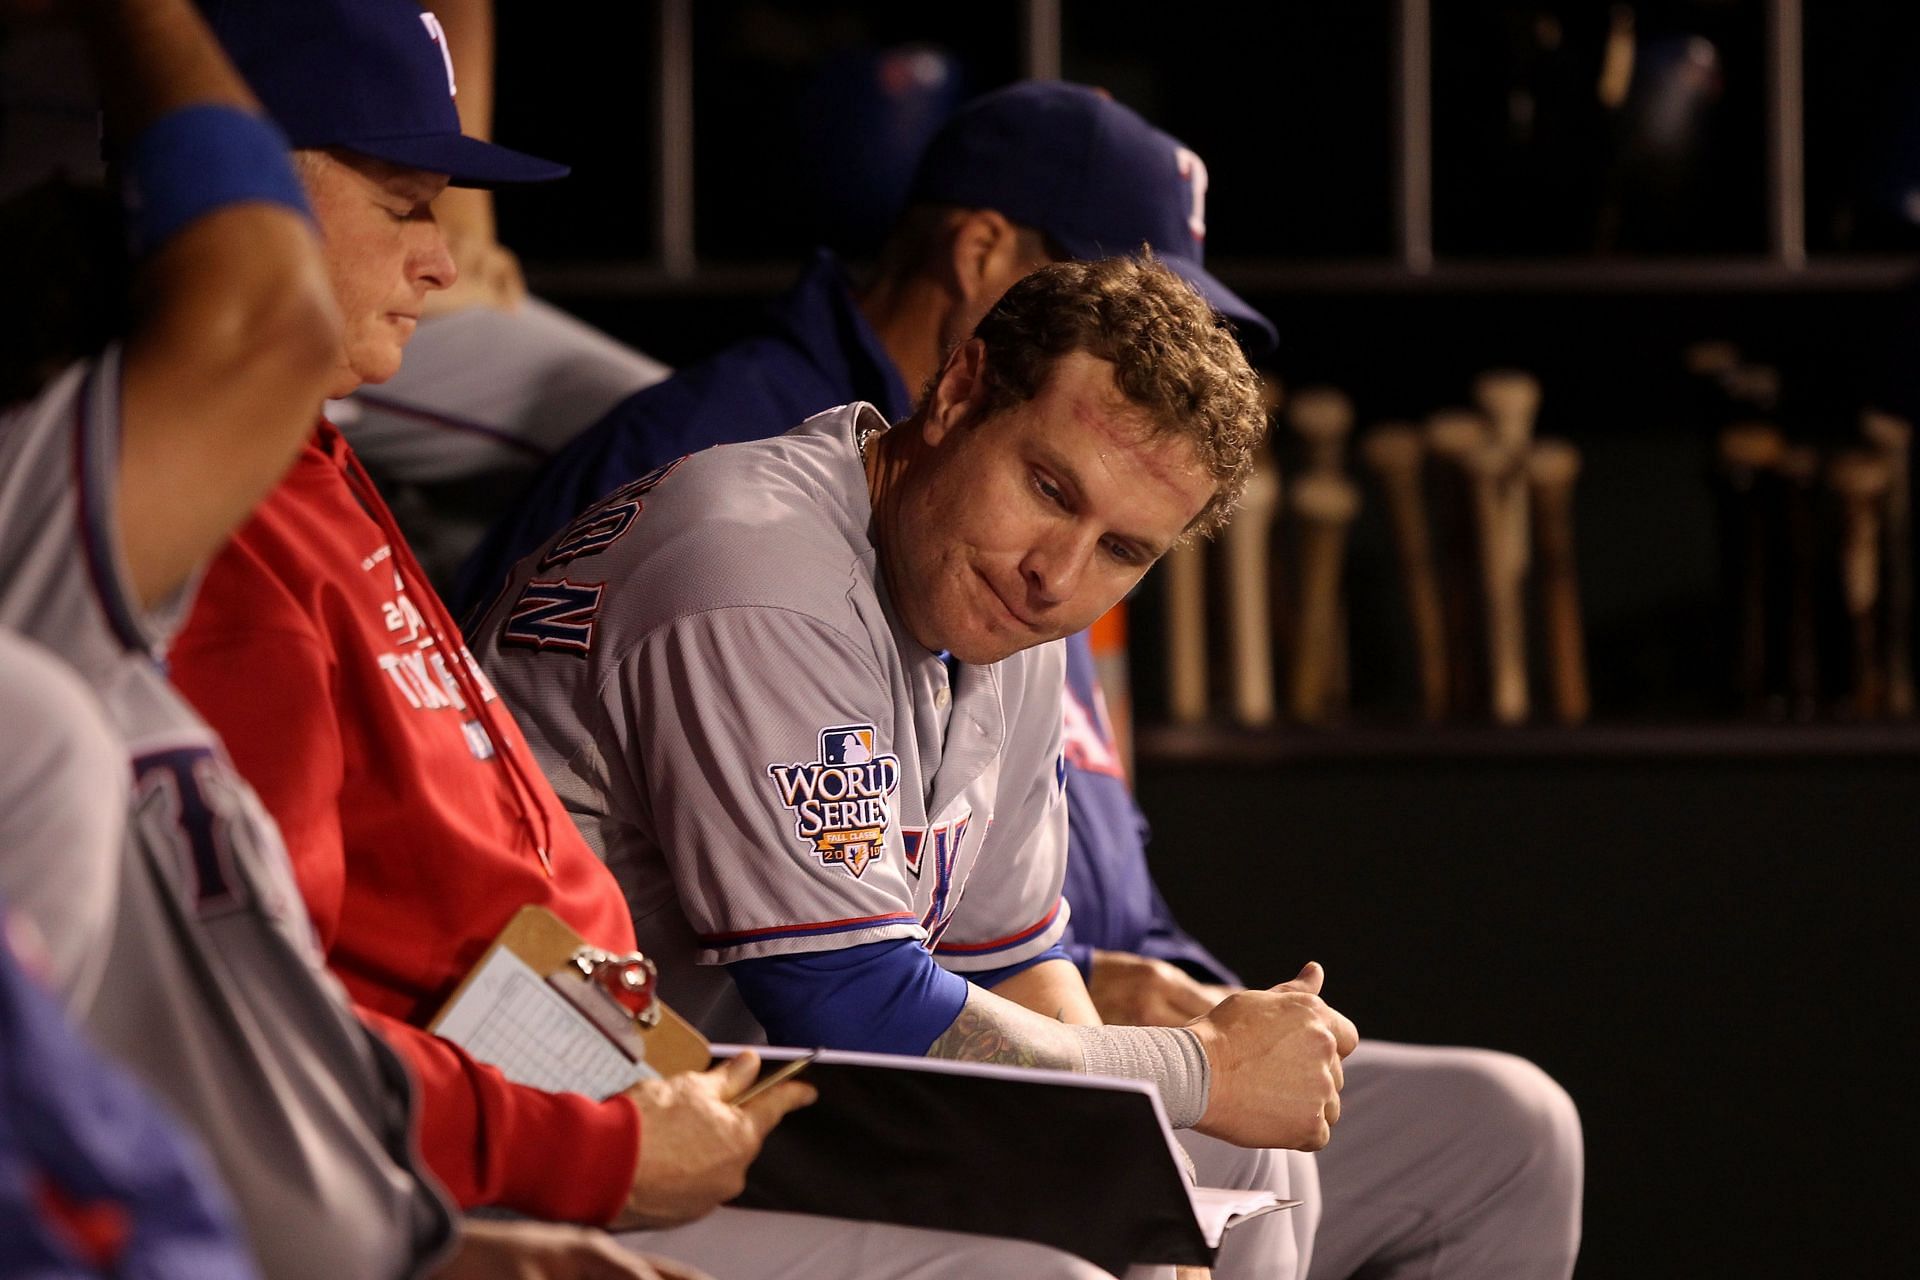 Josh Hamilton, from American League MVP to one year probation for